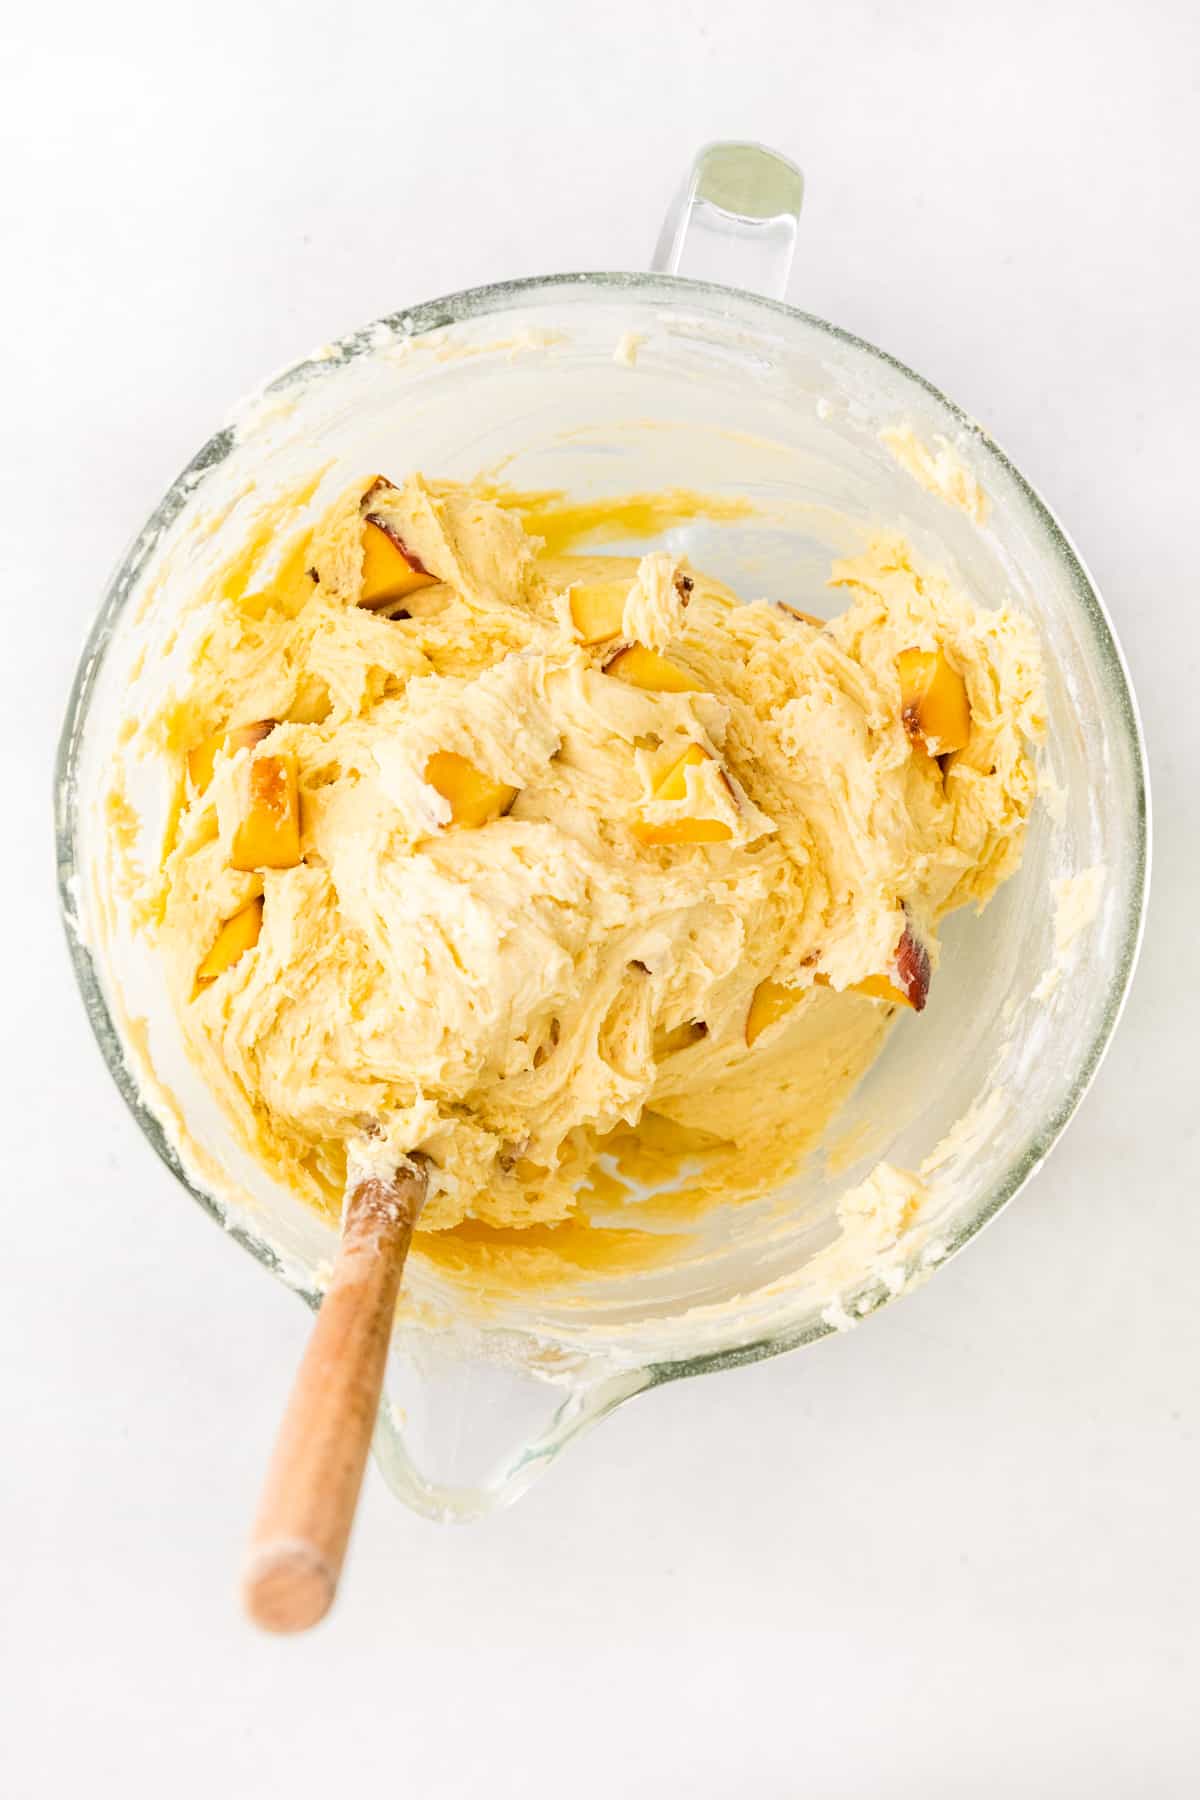 Glass mixing bowl with thick peach bundt cake batter in it, sticking to a wooden spoon